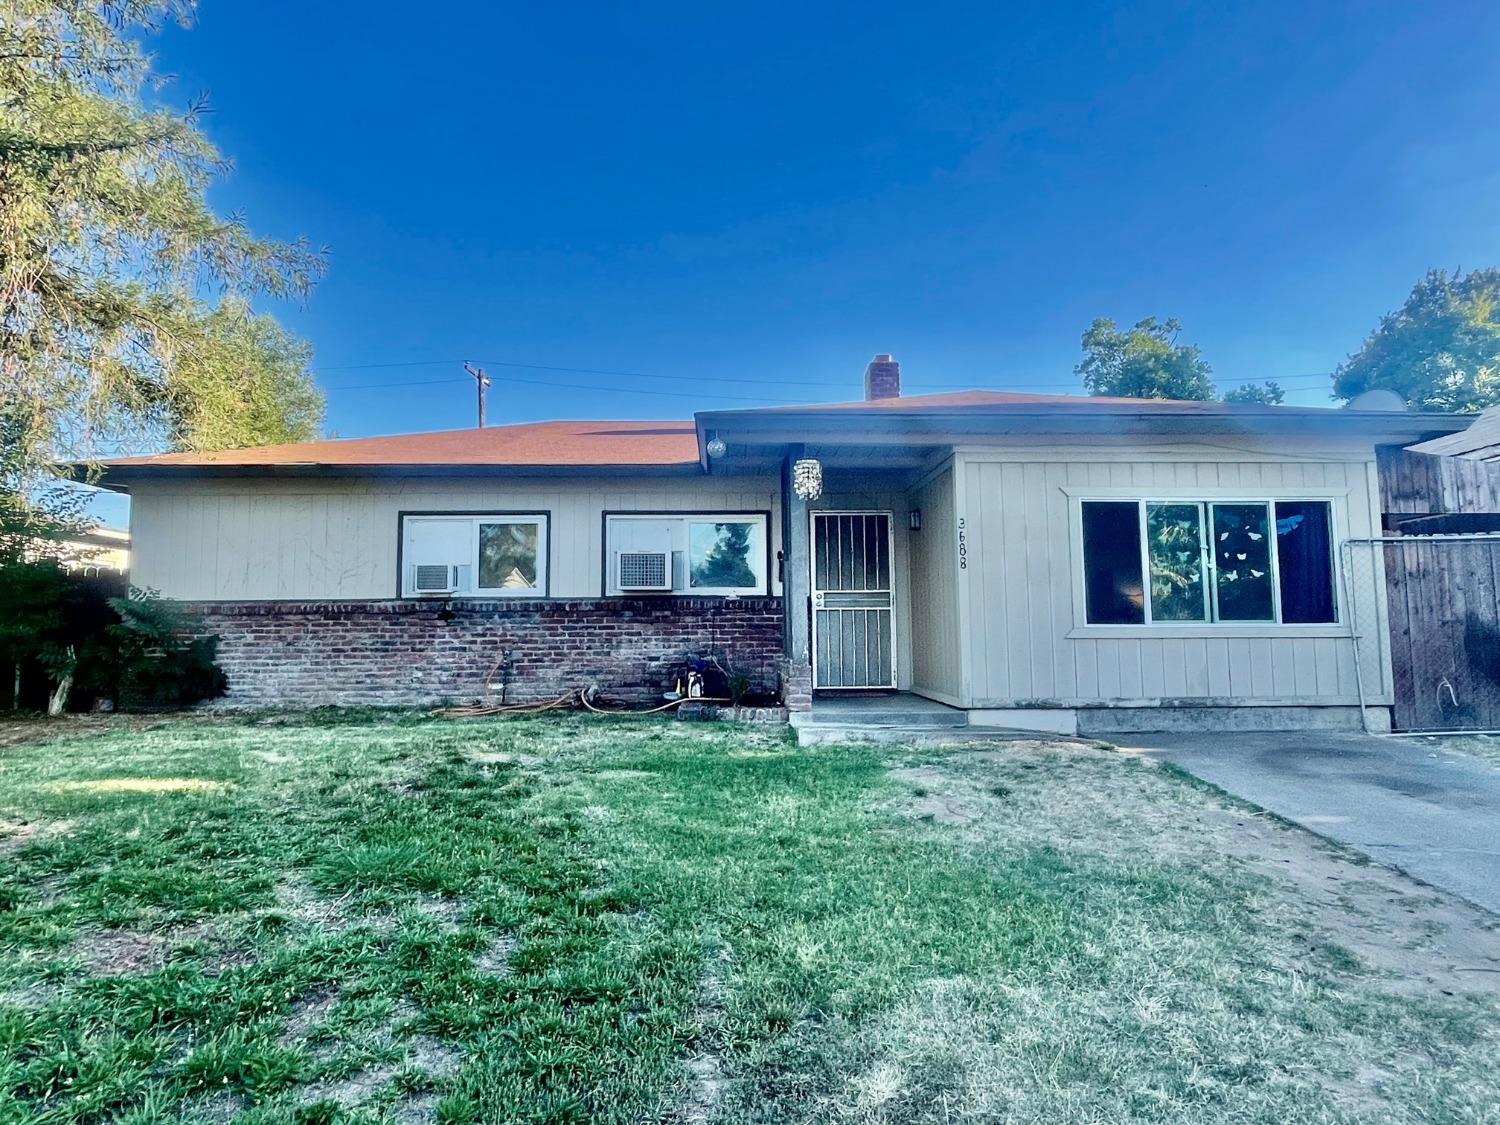 Photo of 3688 David Dr in North Highlands, CA